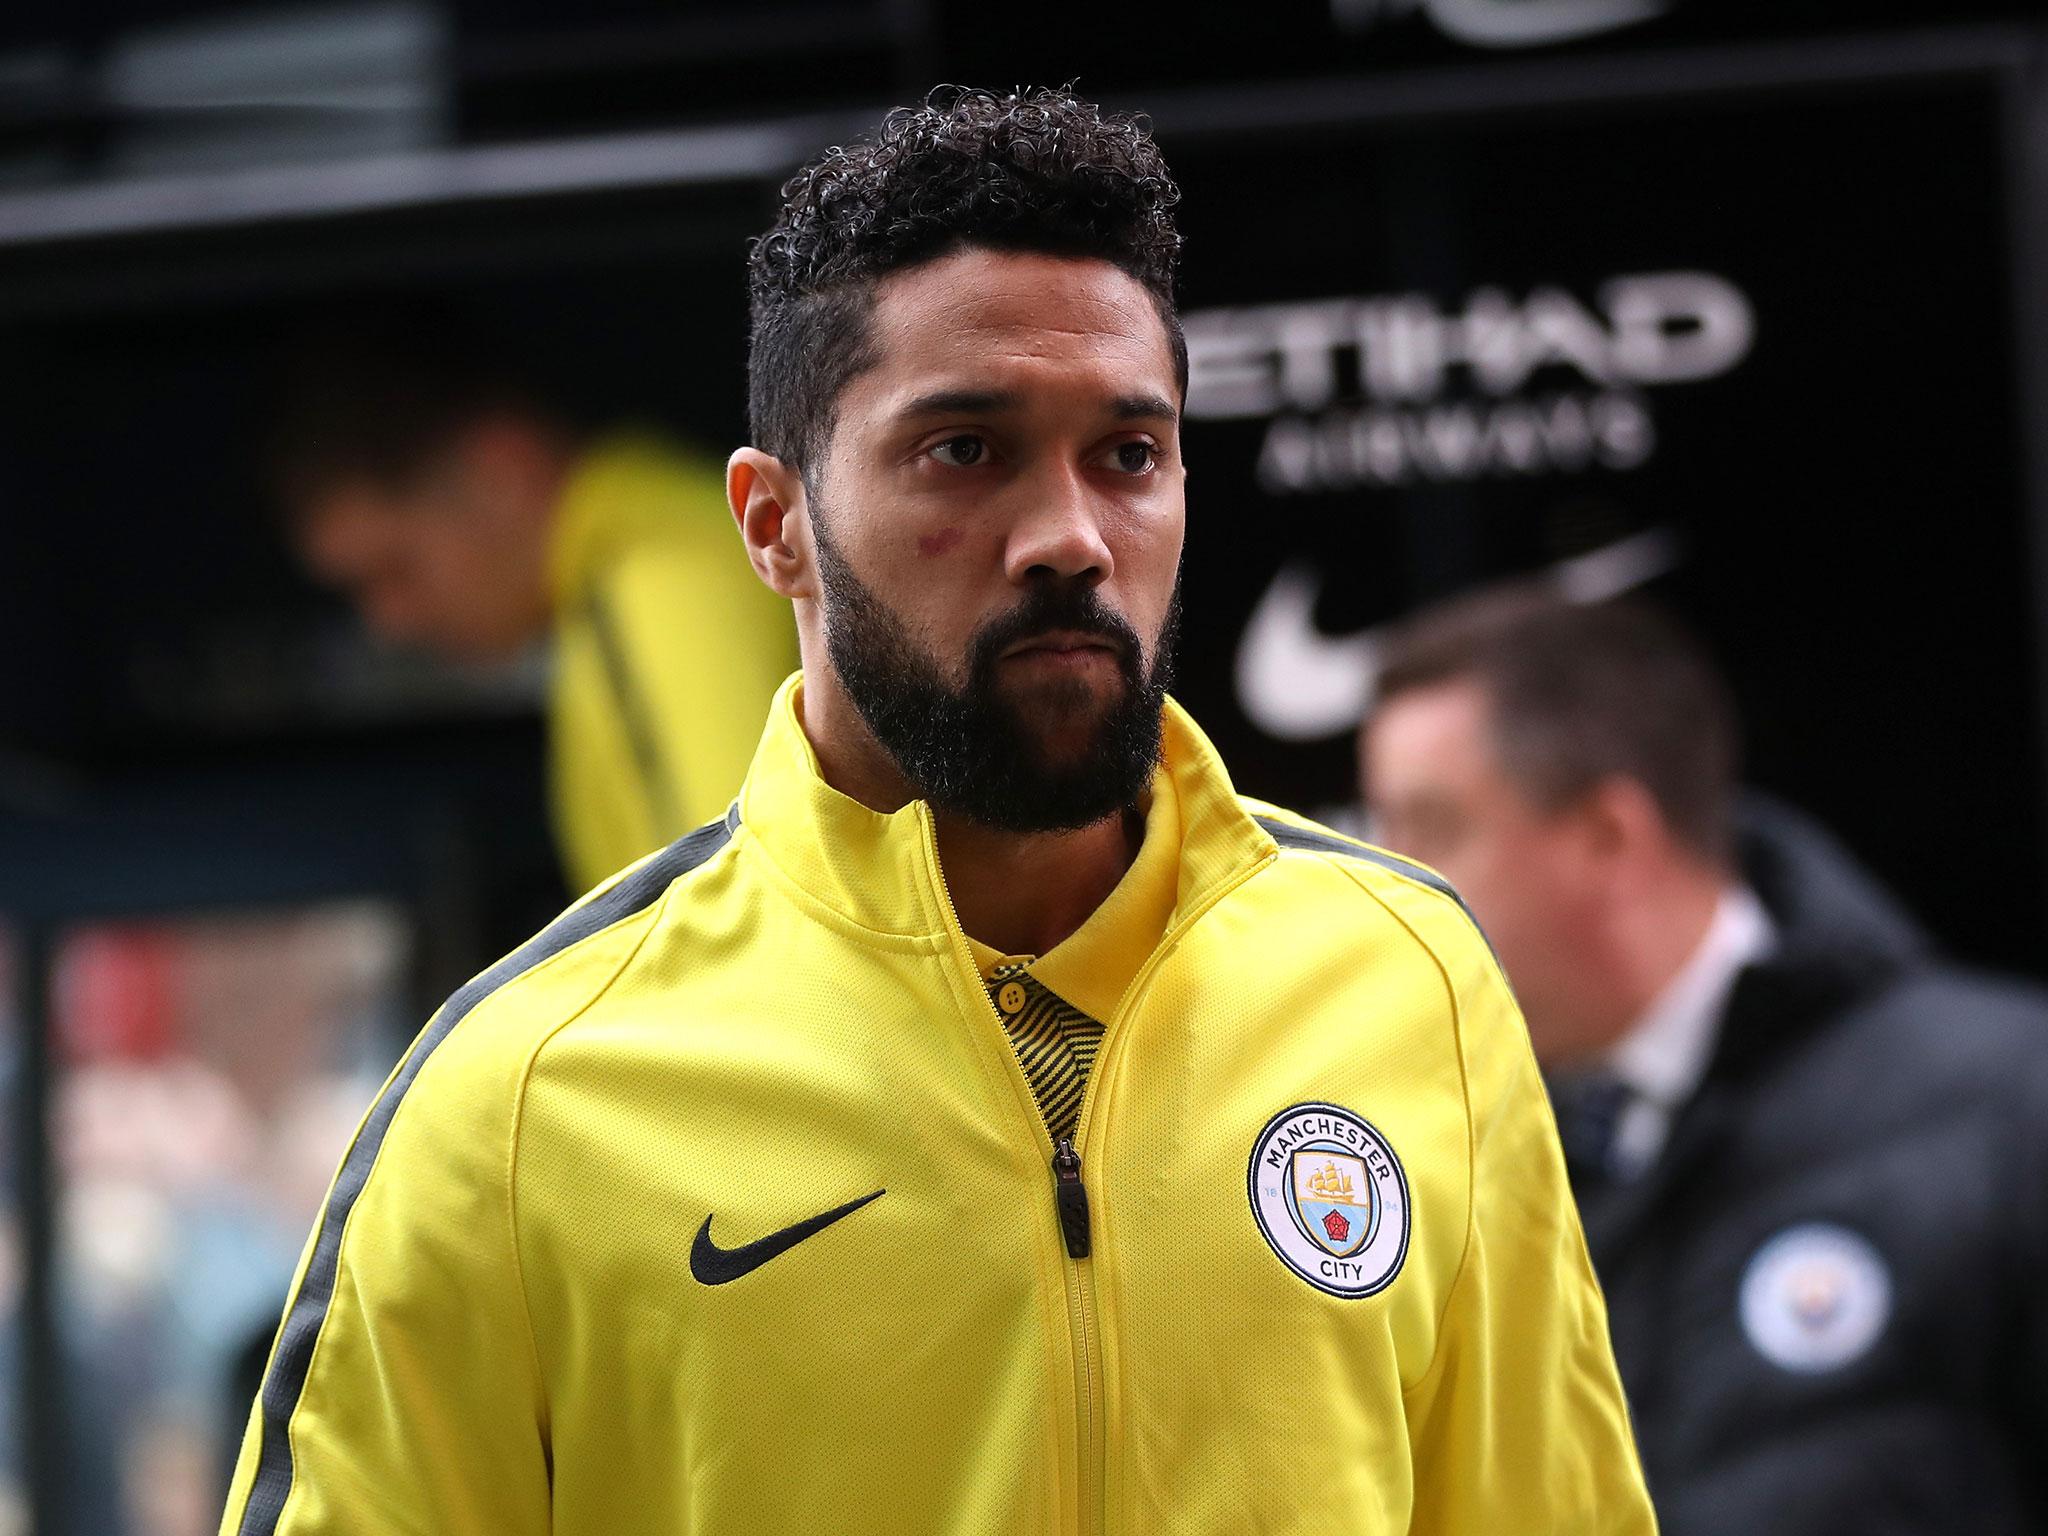 Clichy spoke in defence of the Arsenal manager